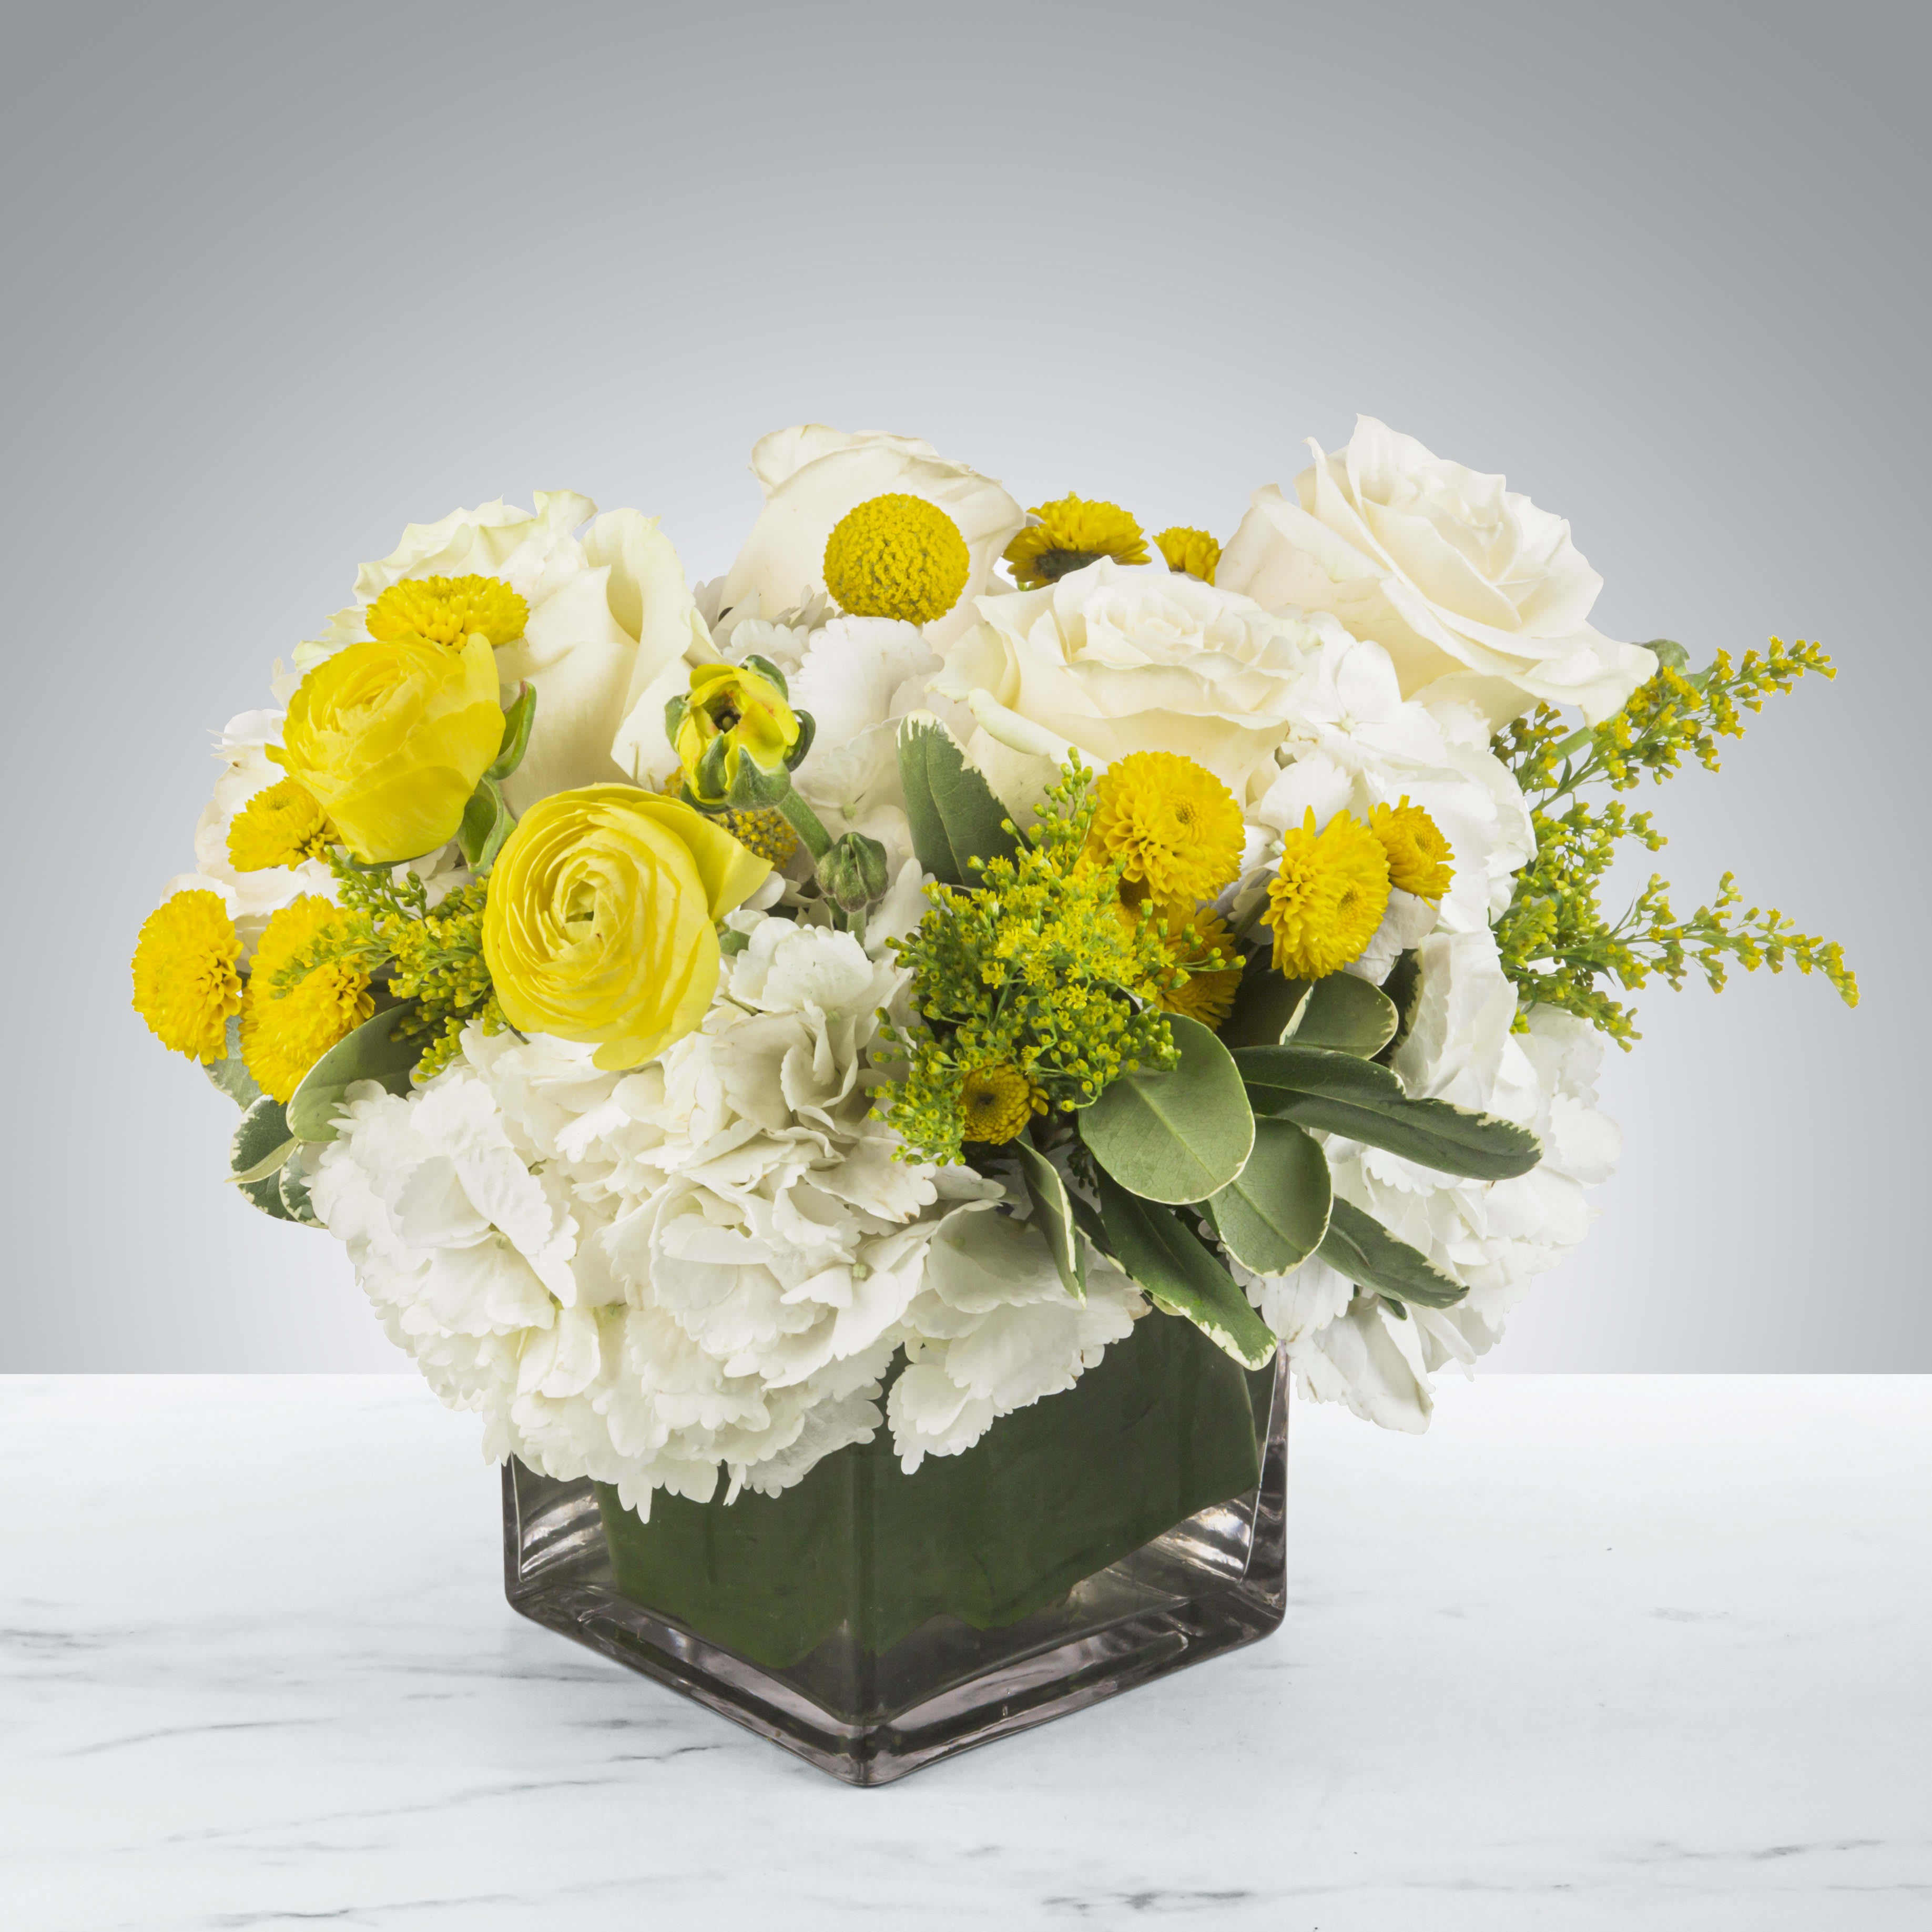 Honeybee  - This white and yellow arrangement includes cream roses, button mums, and ranunculuses. Honeybee is the perfect way to brighten a day! Send a little joy and make somebody feel good. Perfect to send as a get well soon present or just because!   APPROXIMATE DIMENSIONS 12&quot; W X 12&quot; H